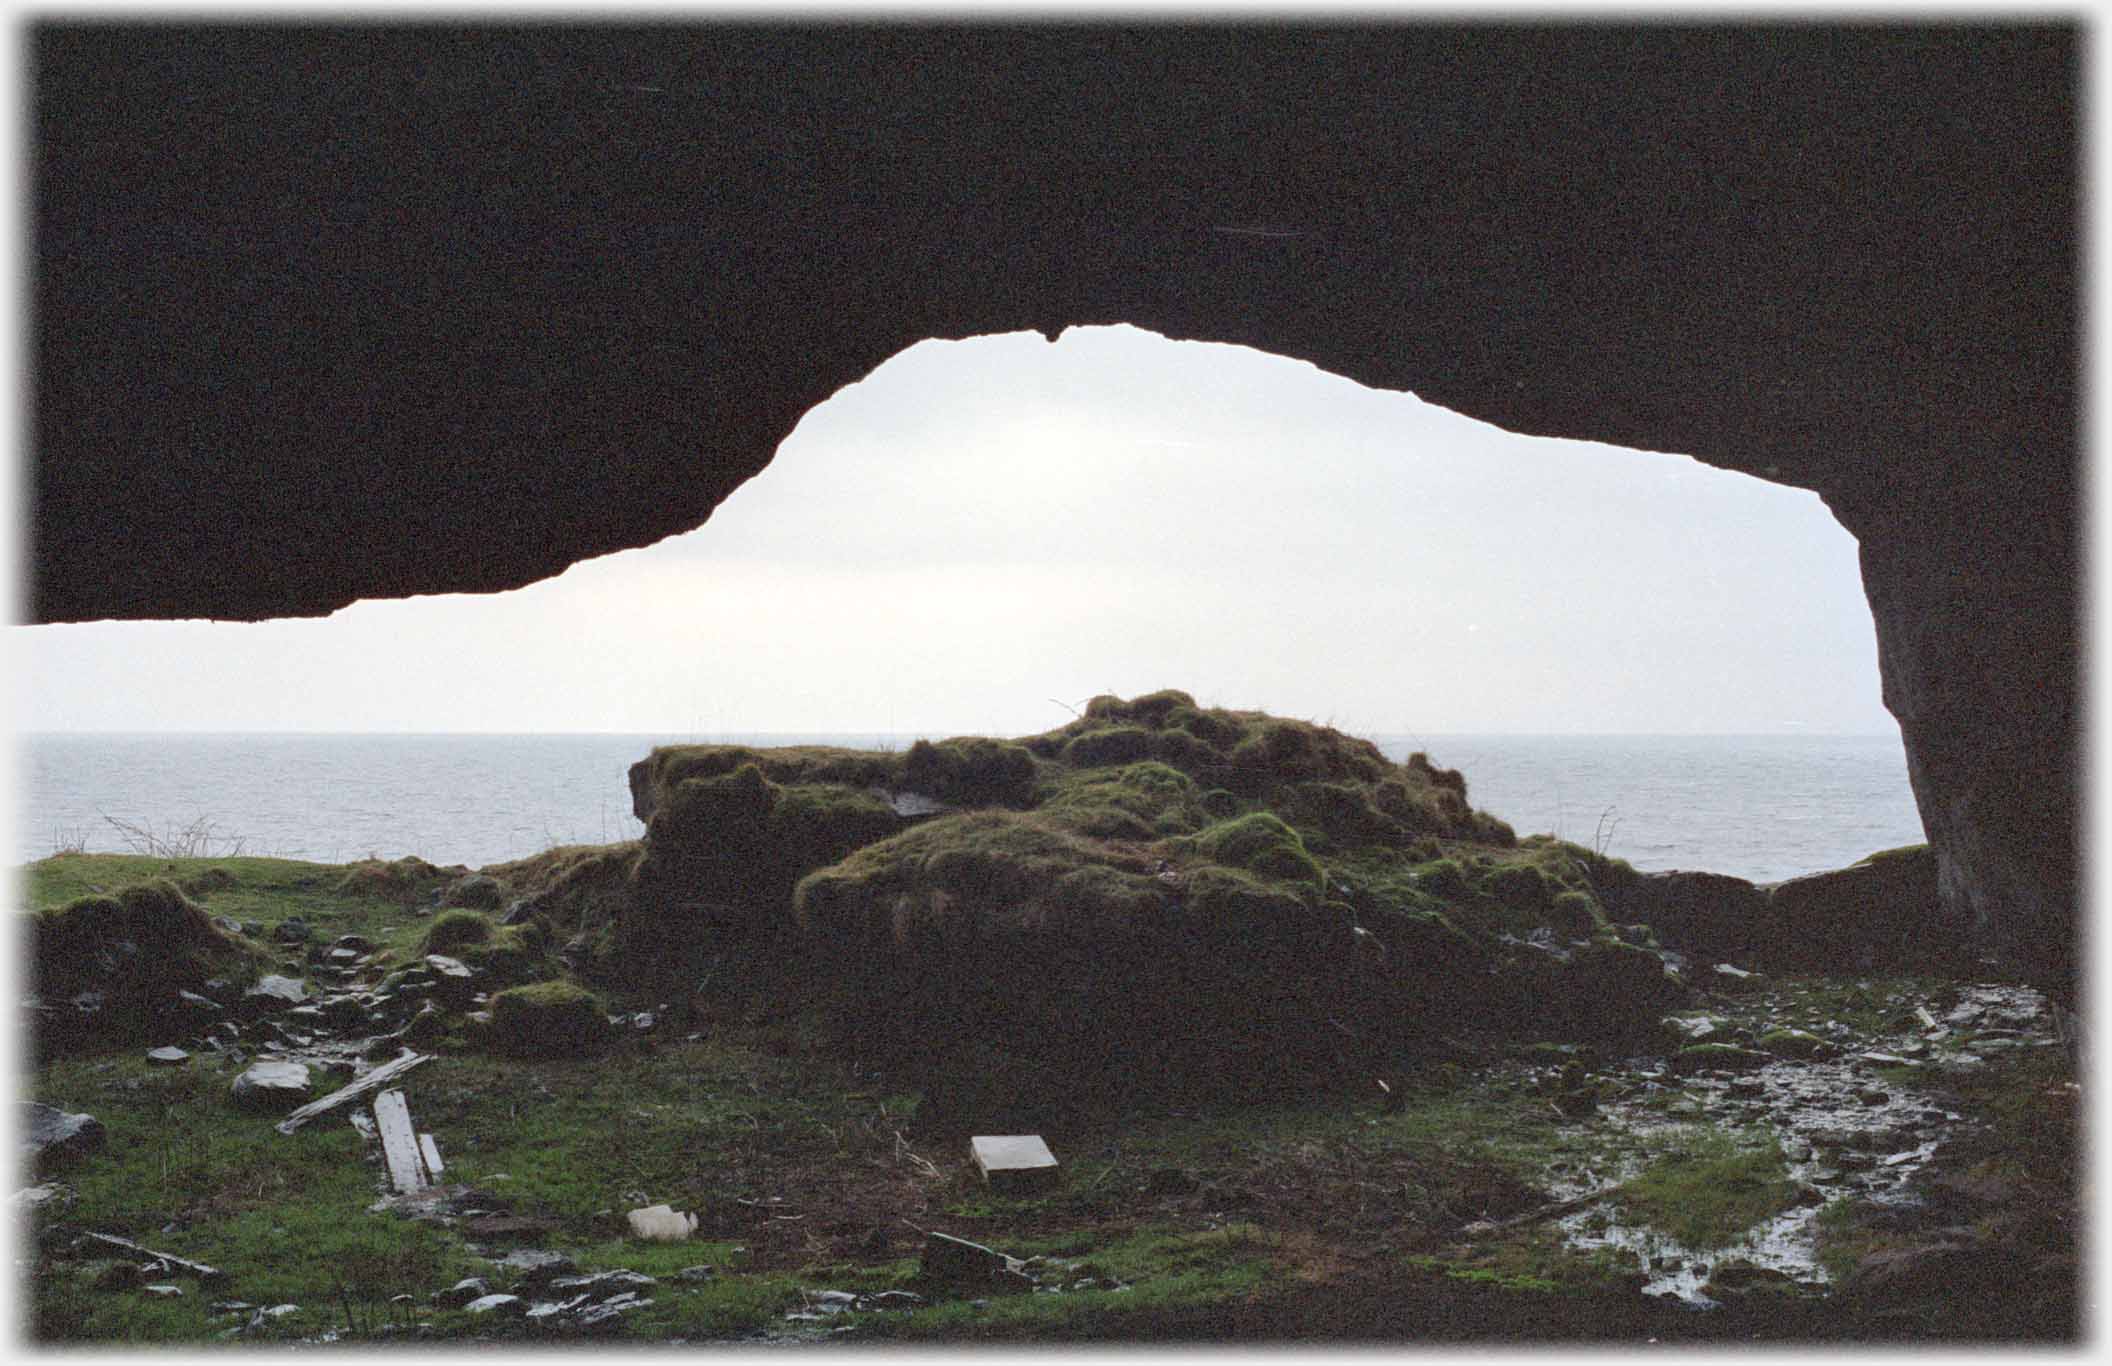 Mouth of cave with sea beyond.